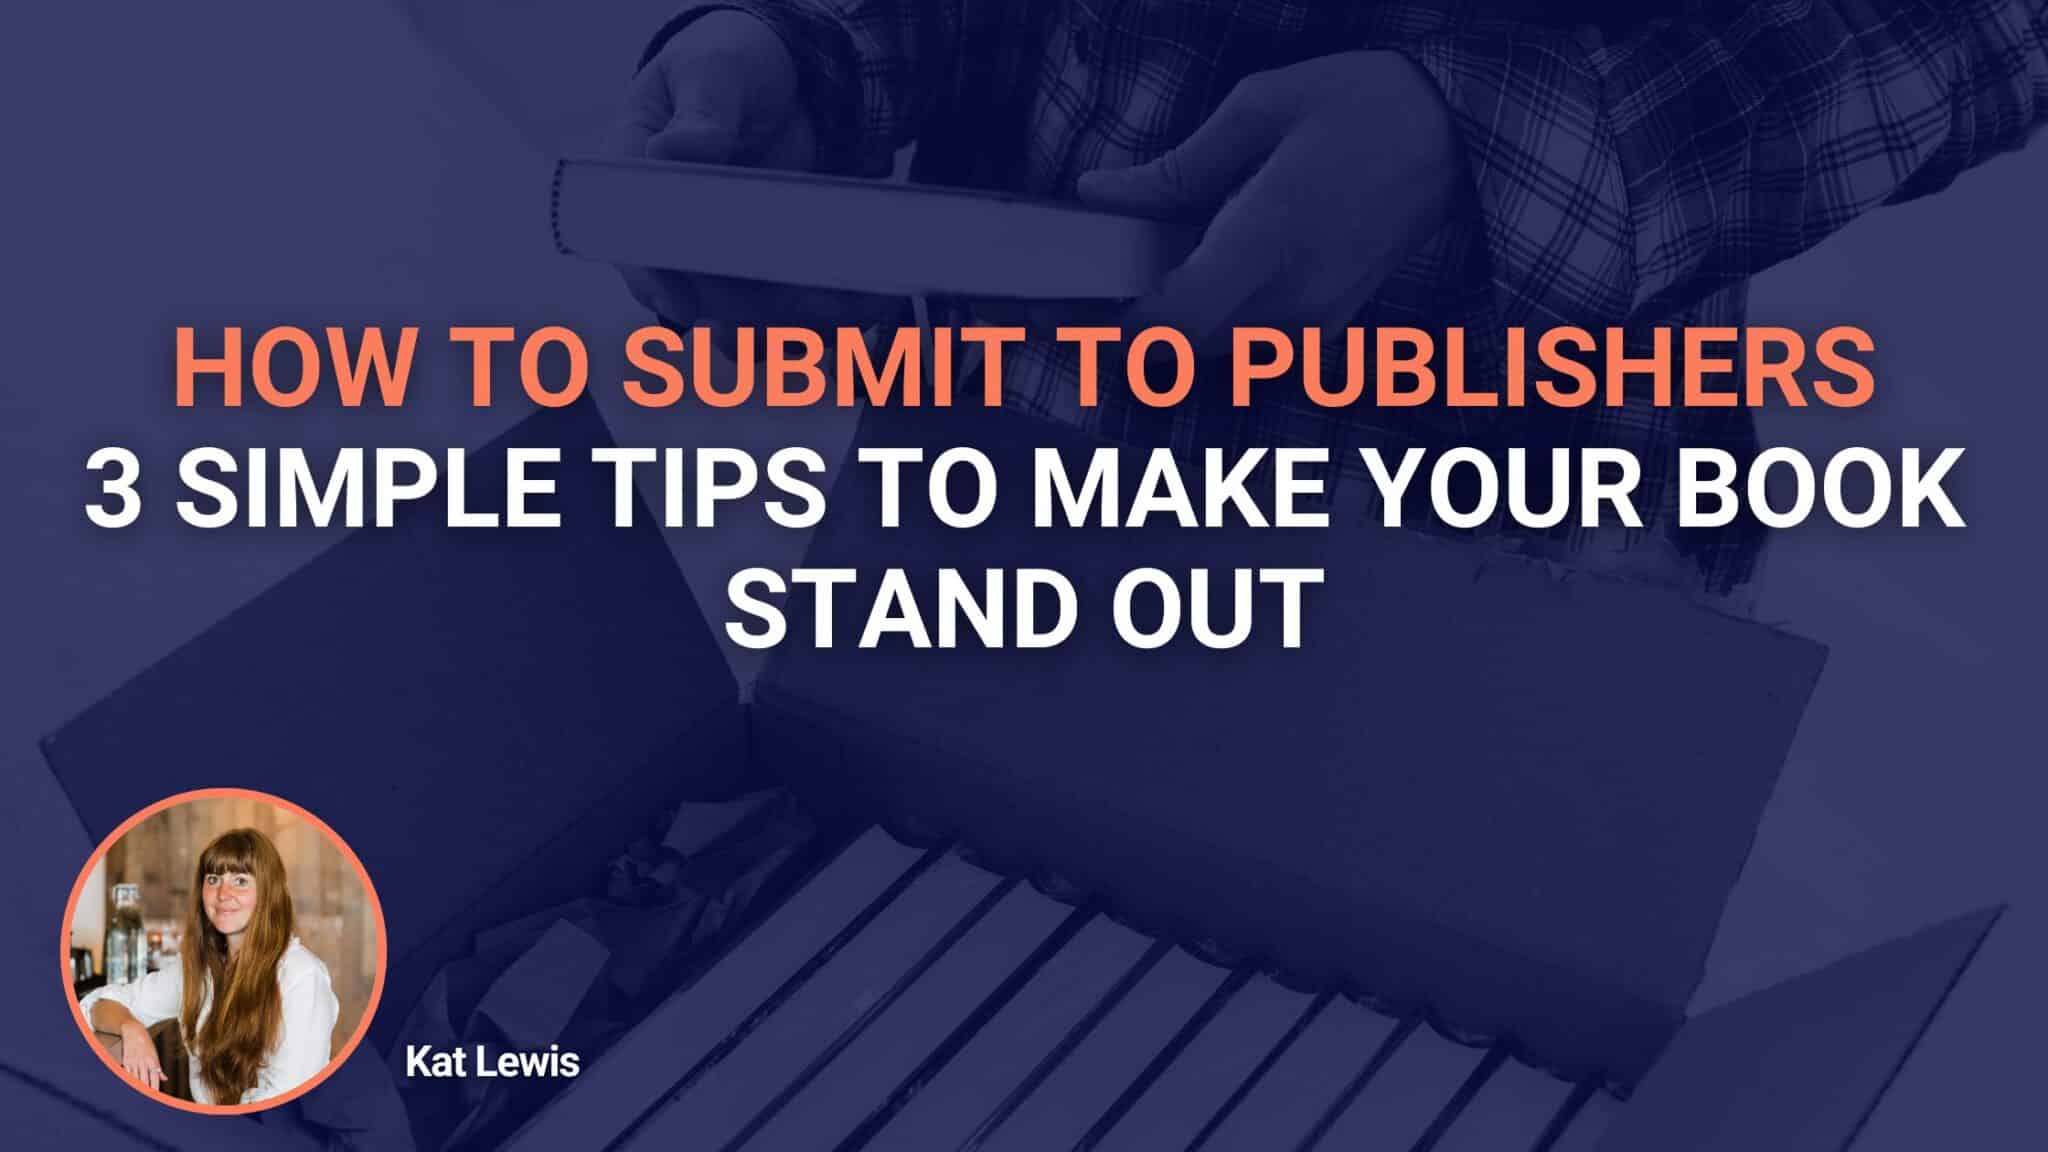 How To Submit To Publishers: 3 Simple Tips To Make Your Book Stand Out